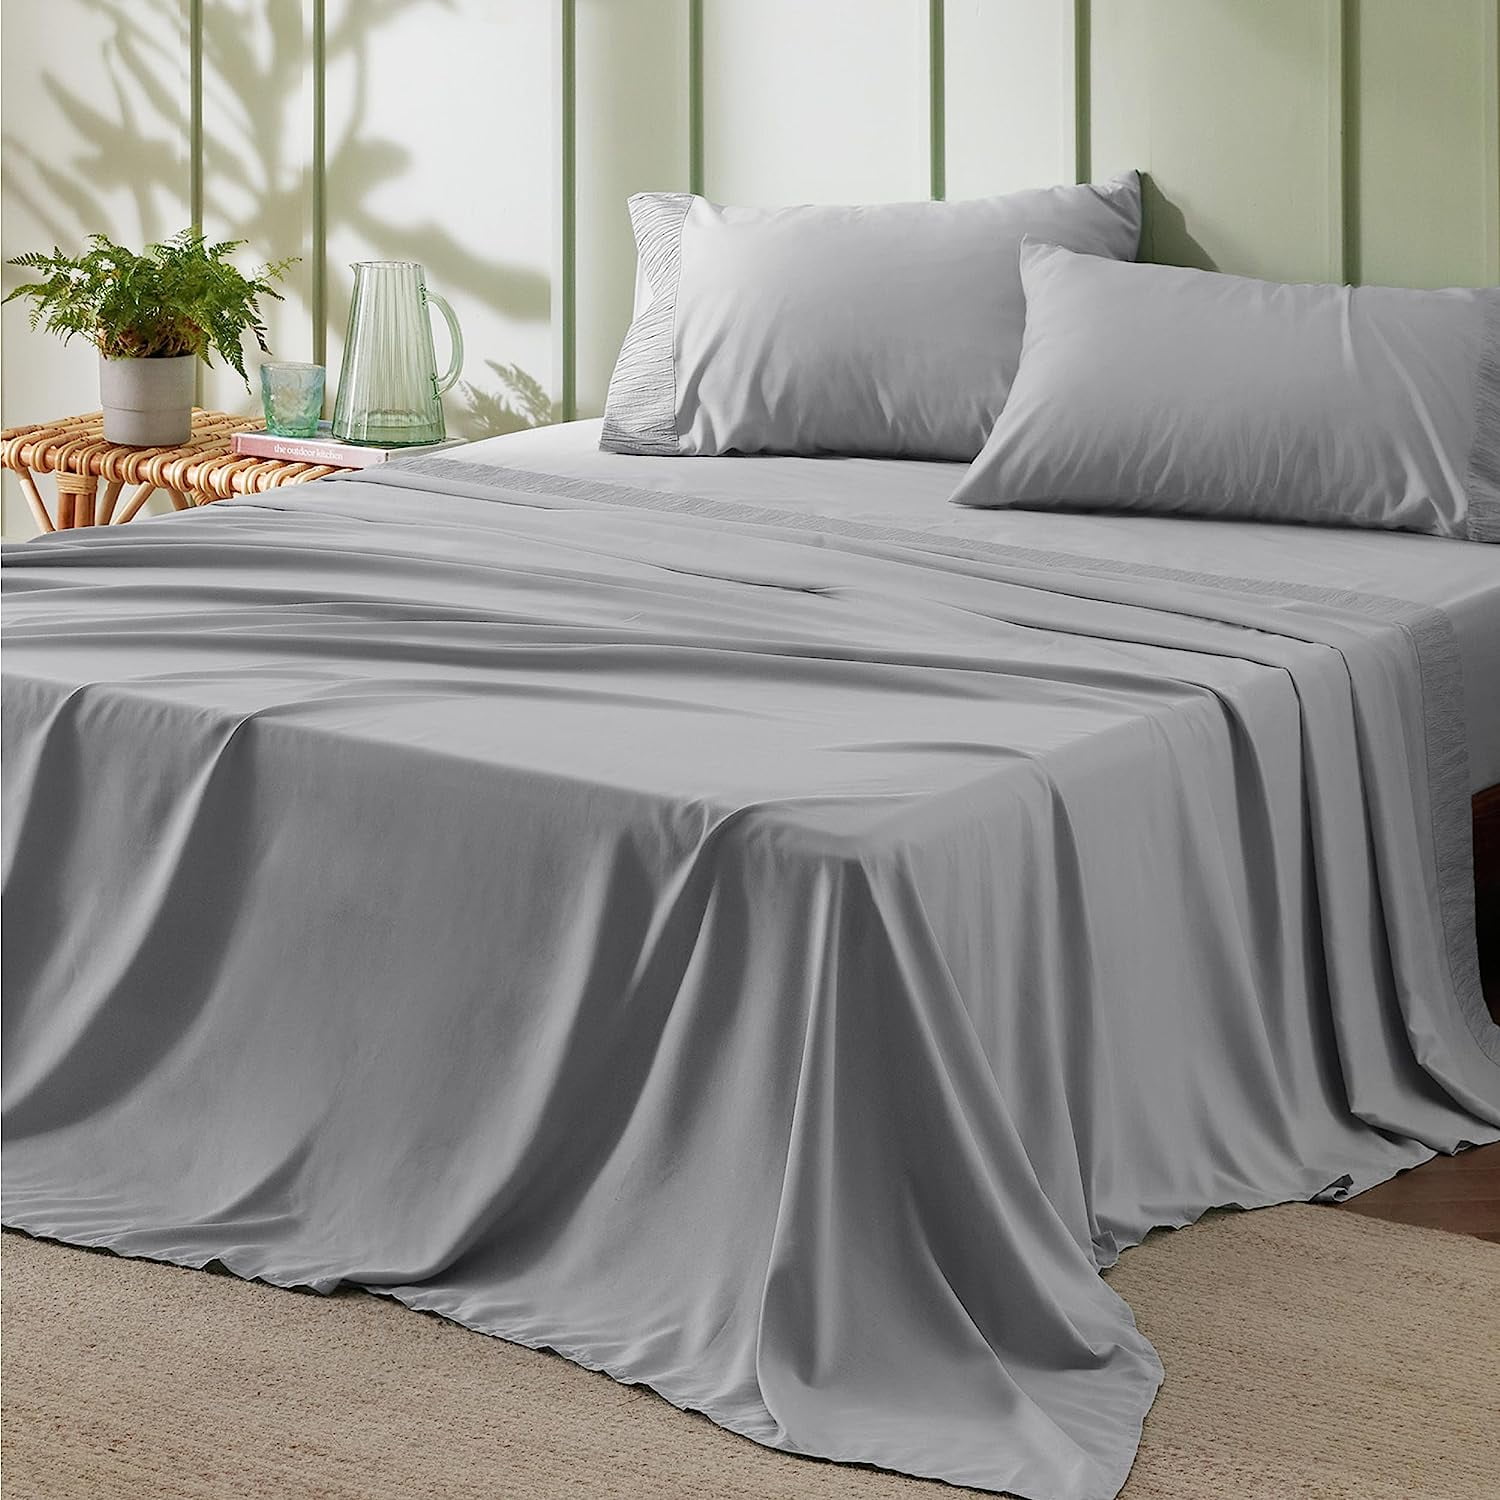 Bedsure 4 Pieces Hotel Luxury Light Grey Sheets Full，Easy Care